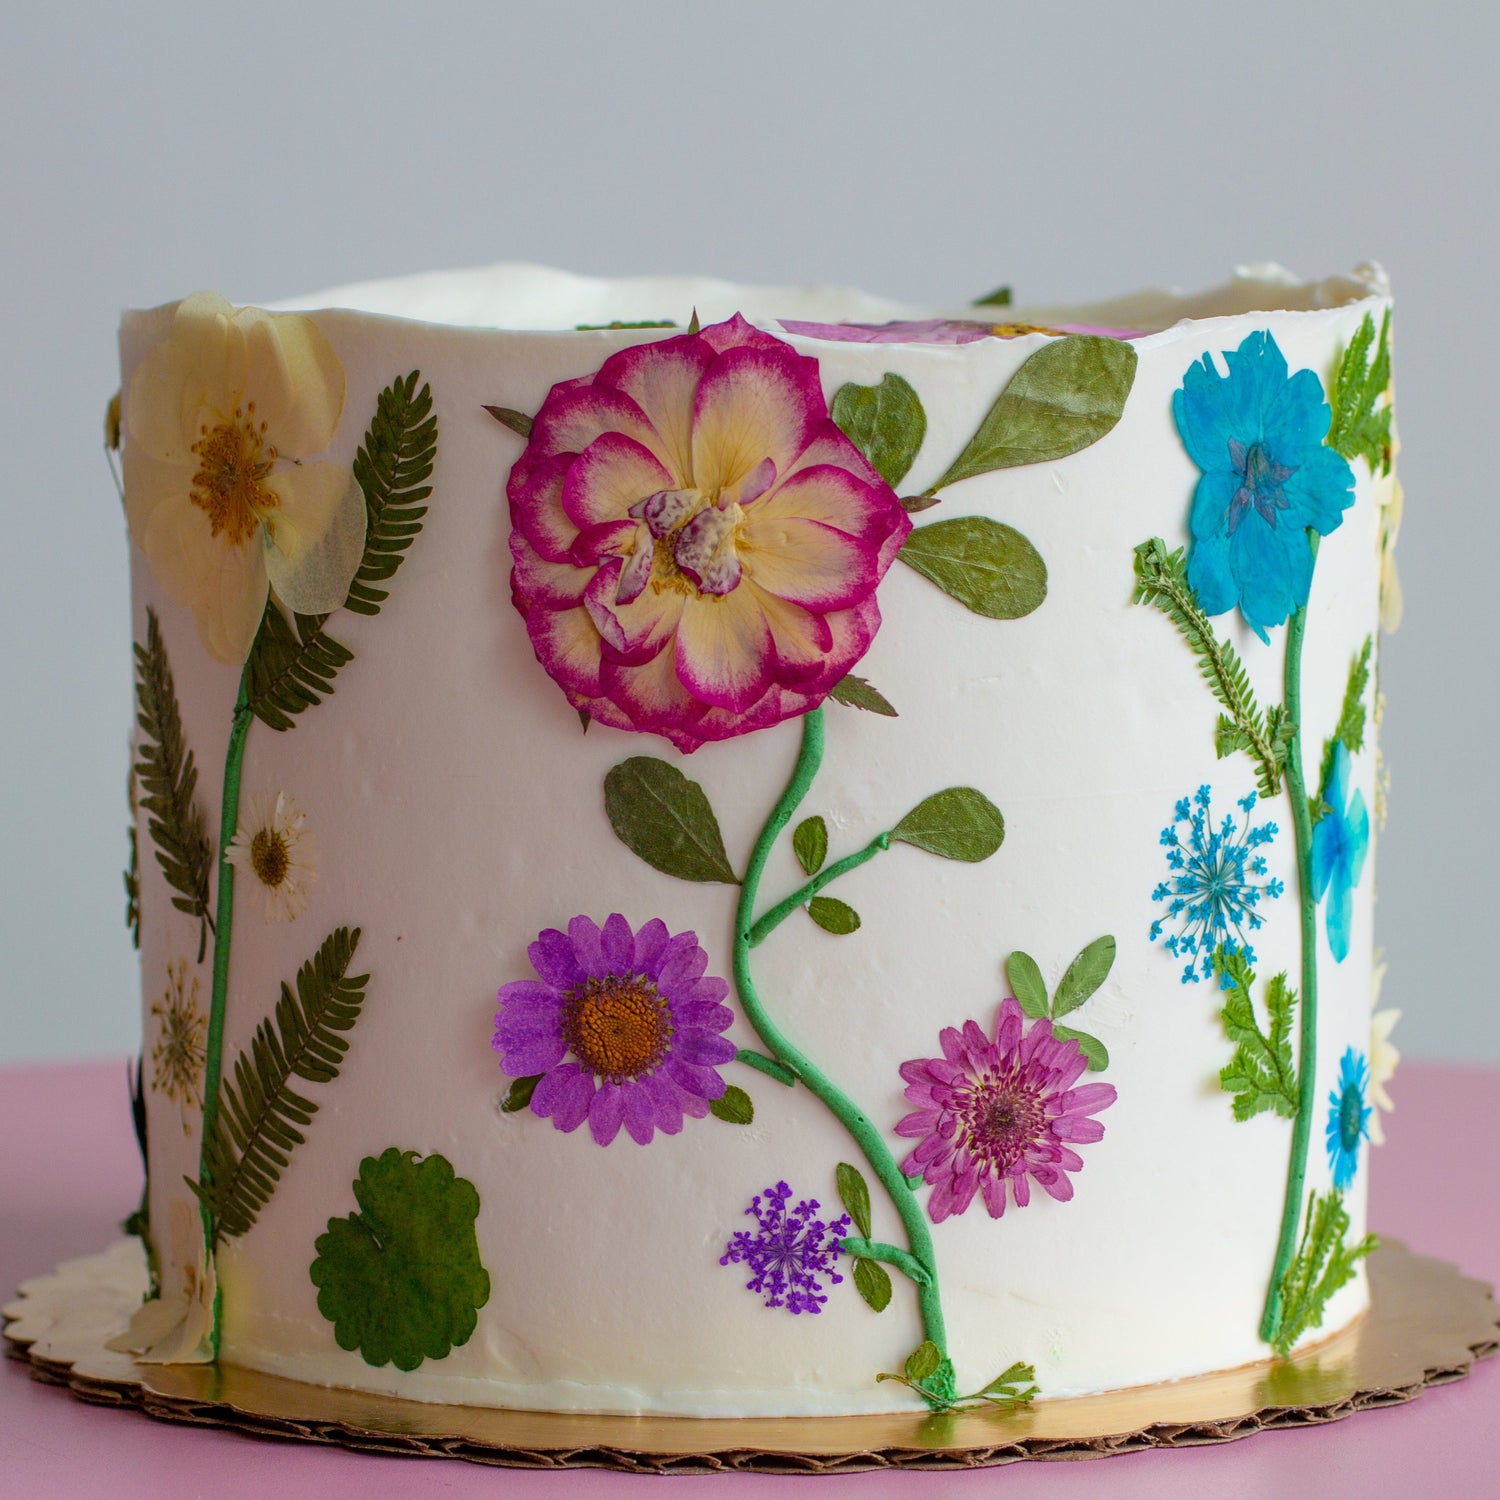 Gallery  CAKES WITH FLOWERS